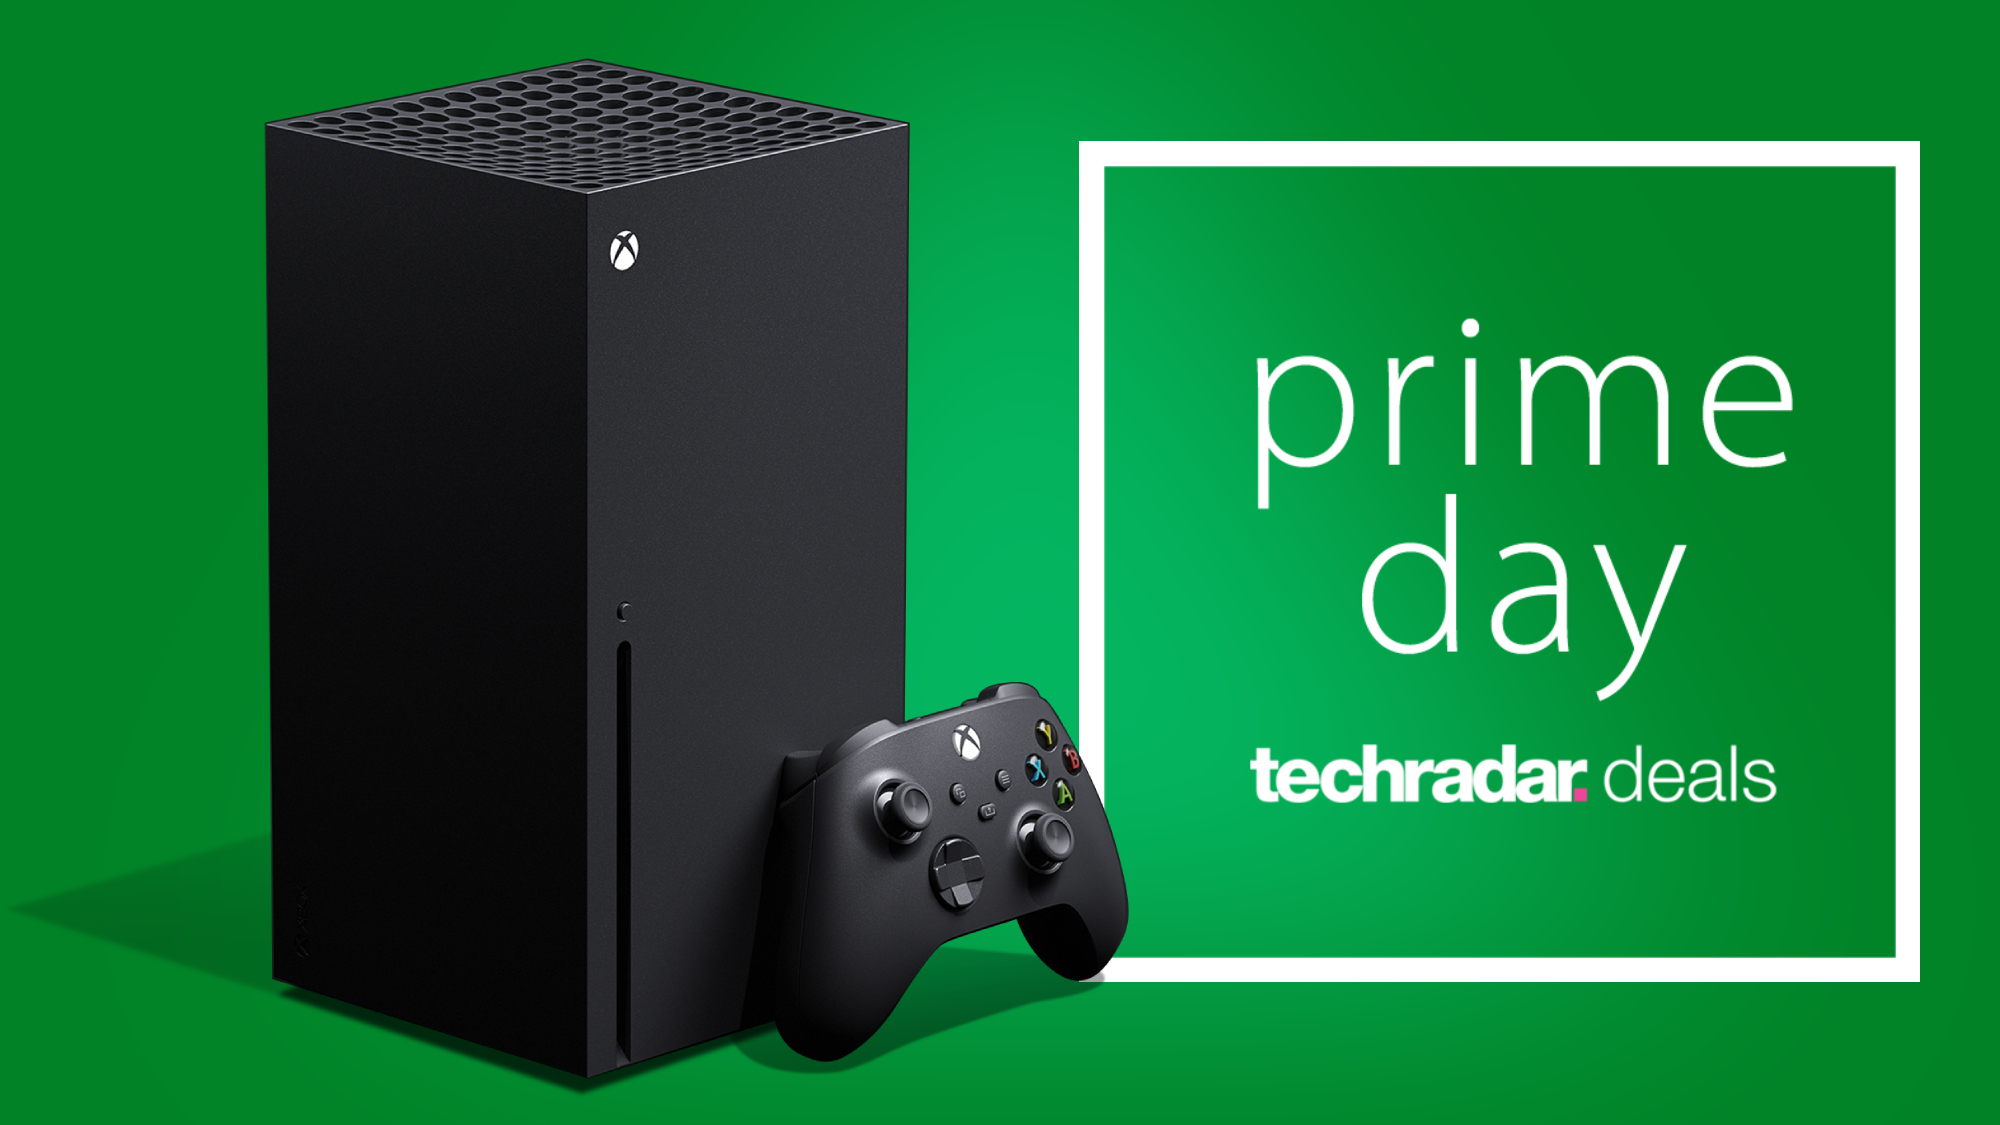 The best  Prime Big Deal Days savings on Switch, PlayStation, and Xbox  games